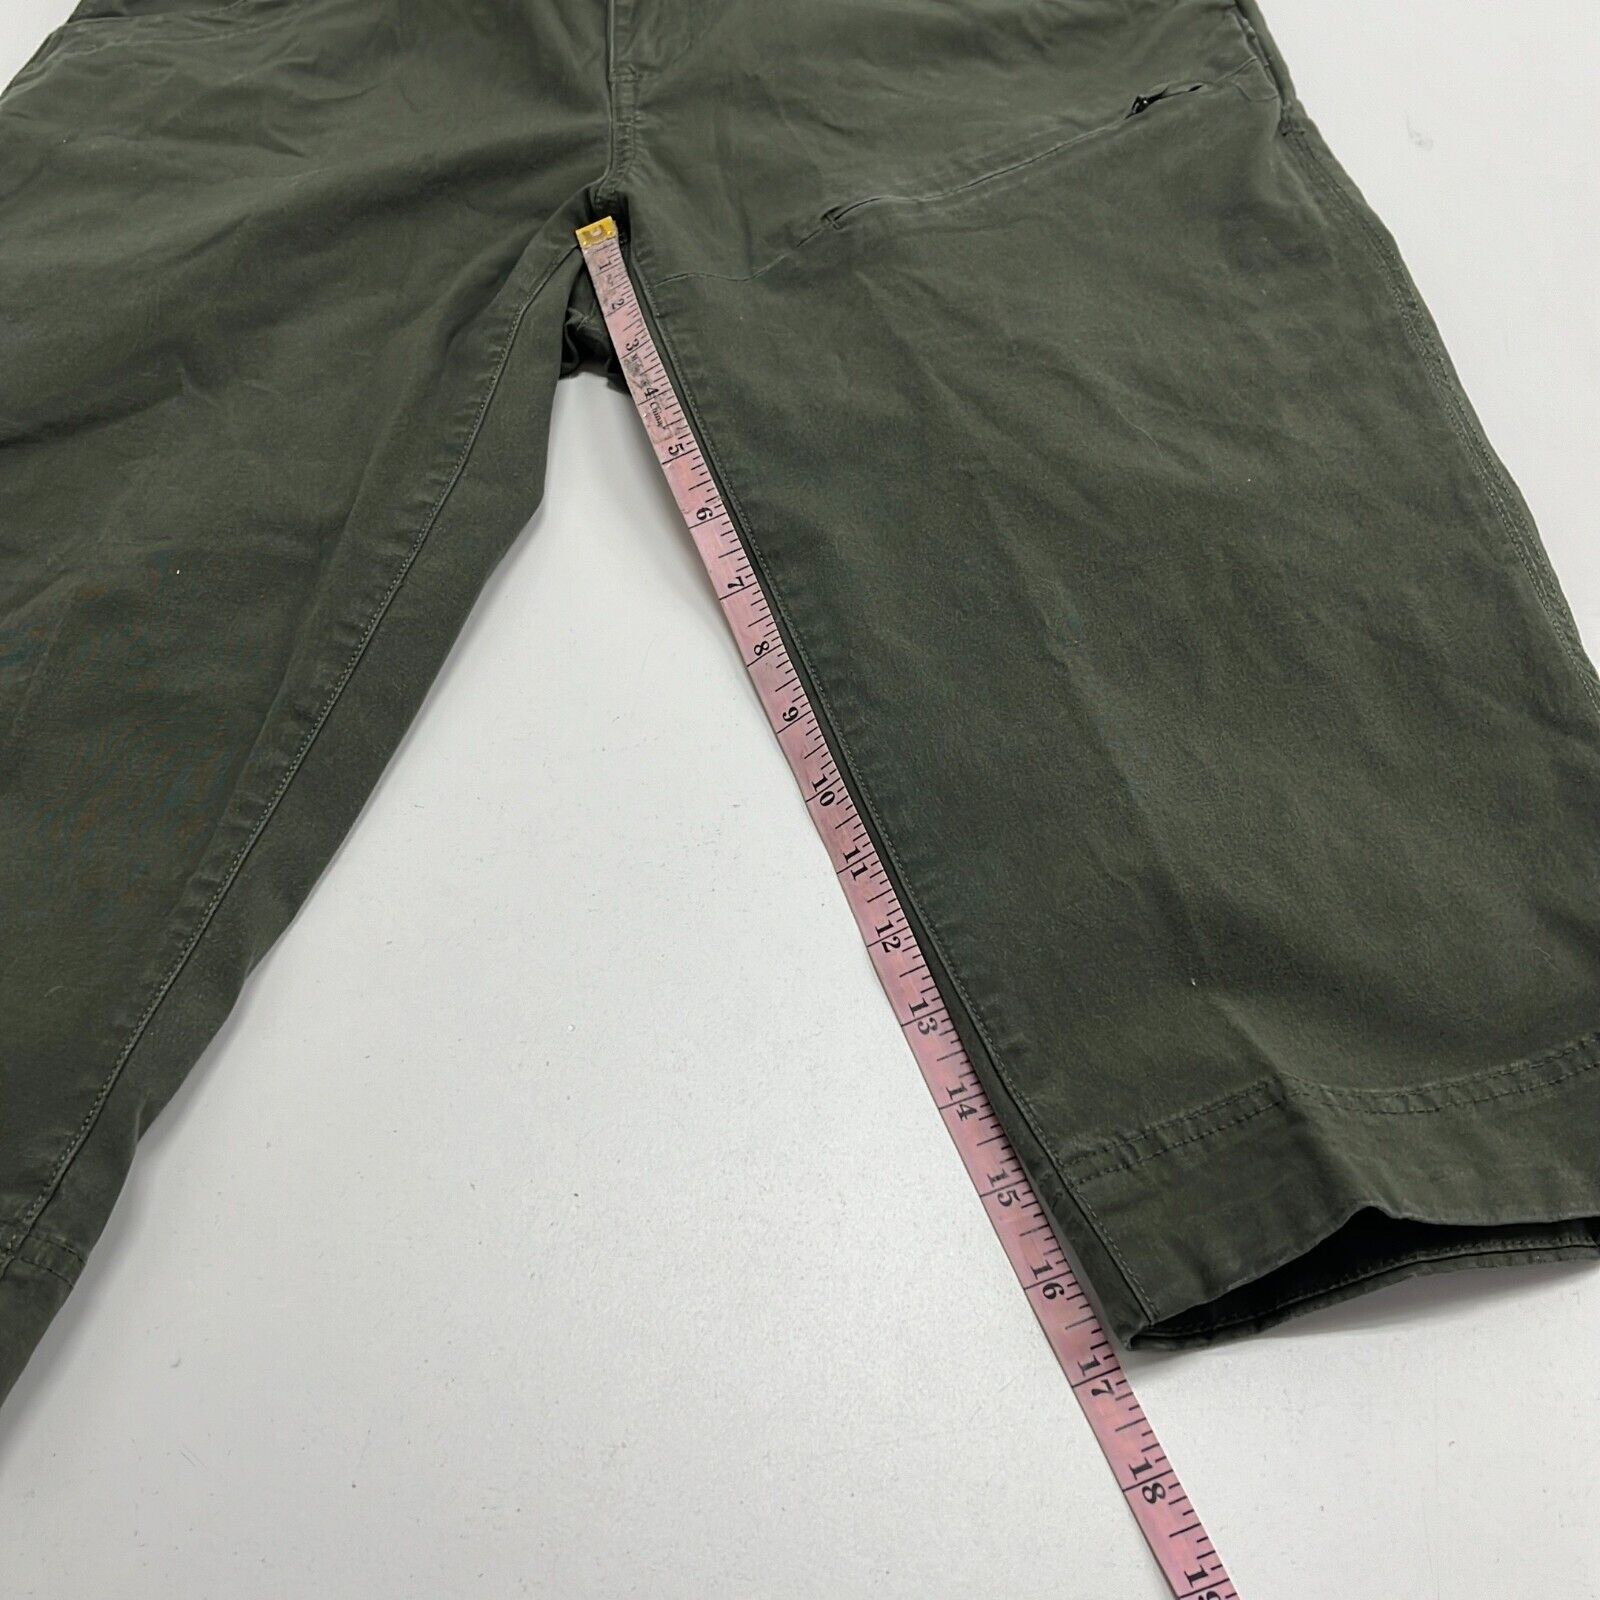 Duluth Trading Co. Women's Green Flat Front Stretch Pockets Capri Pants Size 4